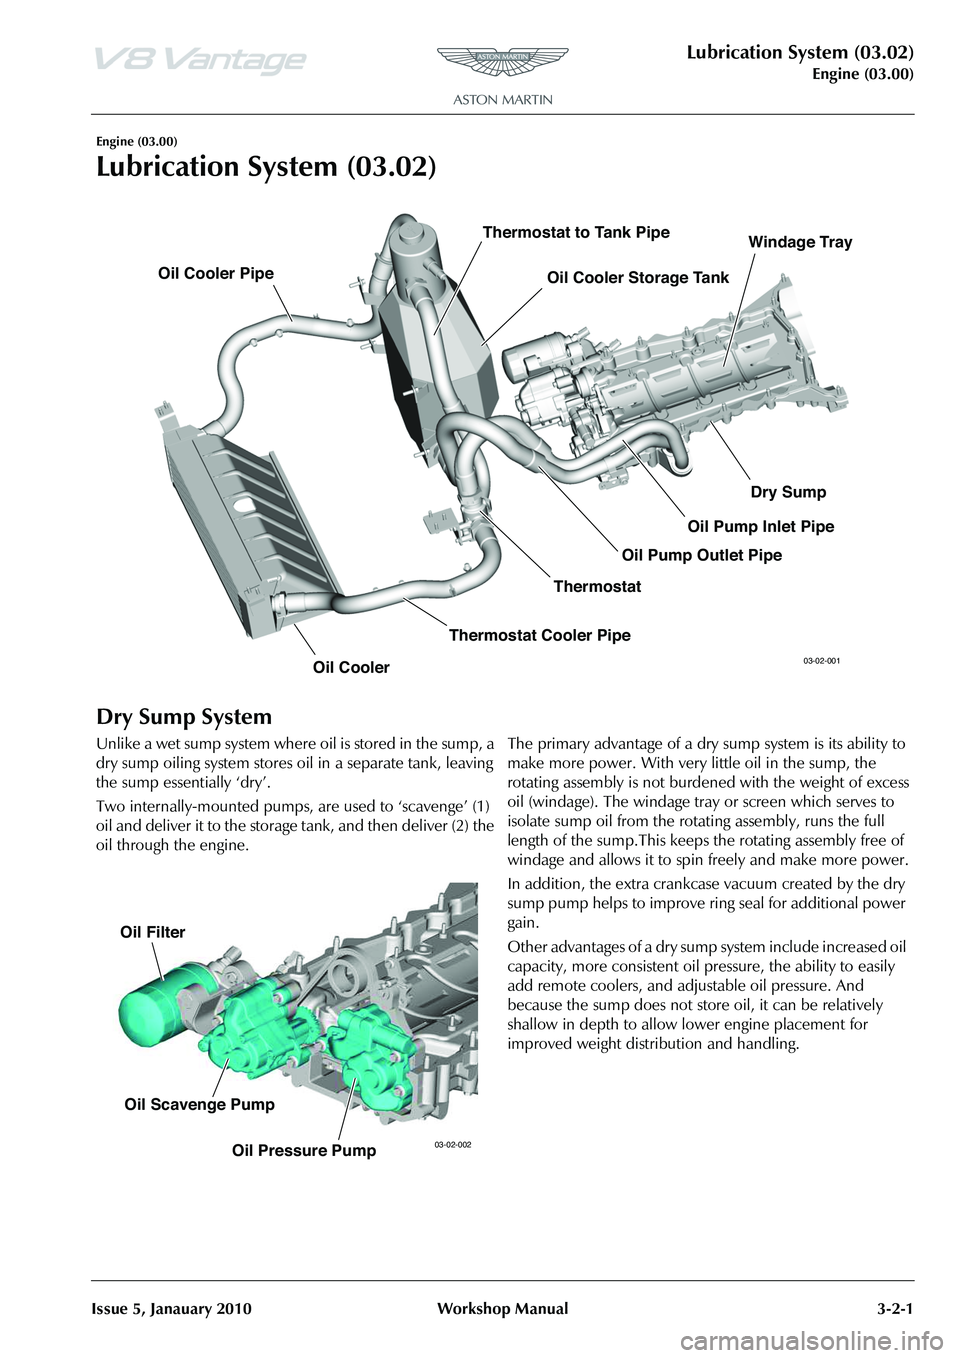 ASTON MARTIN V8 VANTAGE 2010  Workshop Manual Lubrication System (03.02)
Engine (03.00)
Issue 5, Janauary 2010 Workshop Manual 3-2-1
Engine (03.00)
Lubrication System (03.02)
Dry Sump System
Unlike a wet sump system where oil is stored in the sum